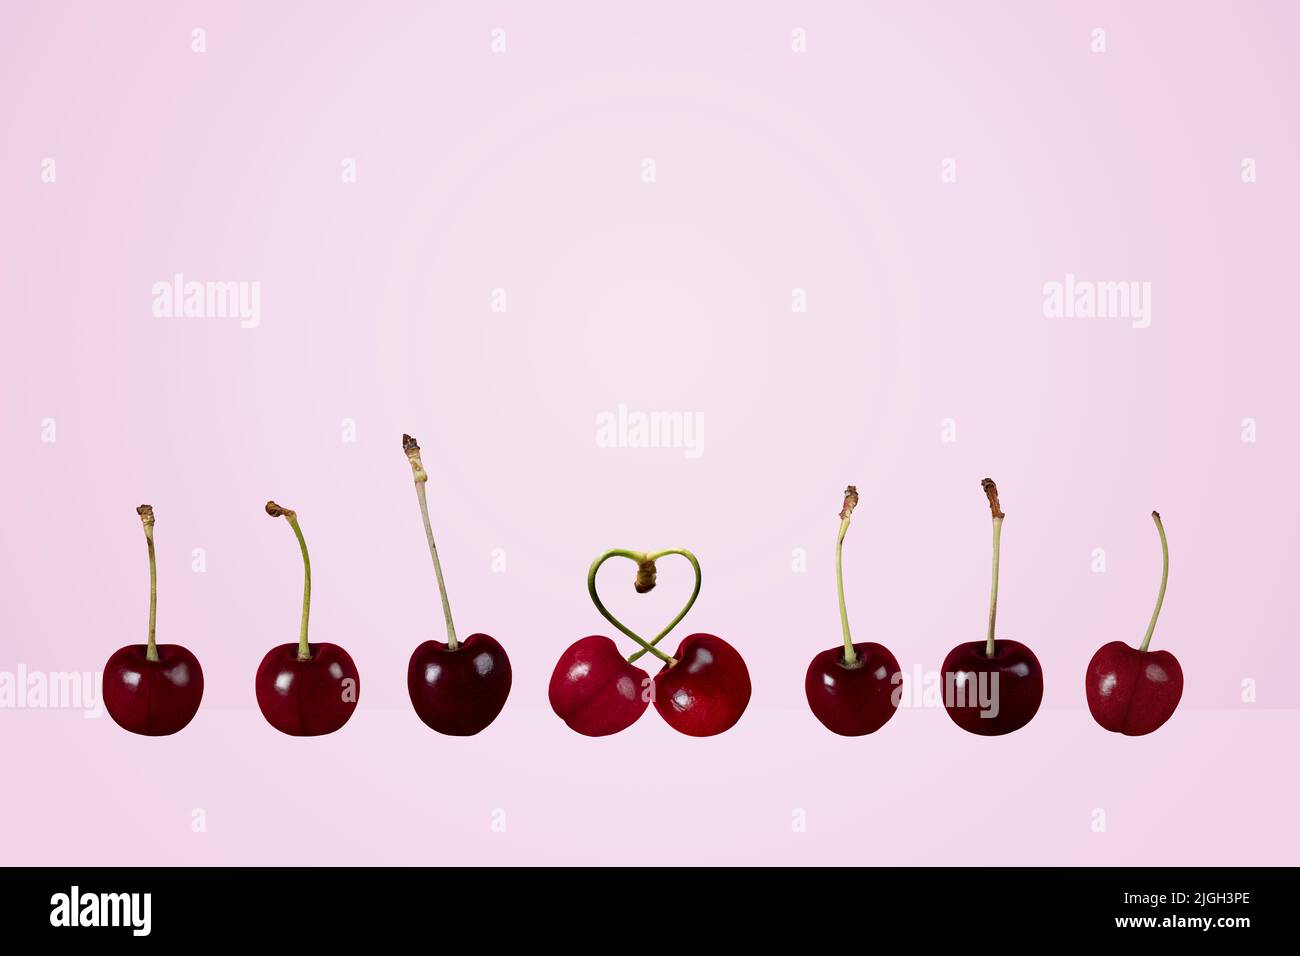 single couple singles couples concept row of ripe cherries pair heart cherries fruit on a colorful colourful lilac lavender background Stock Photo